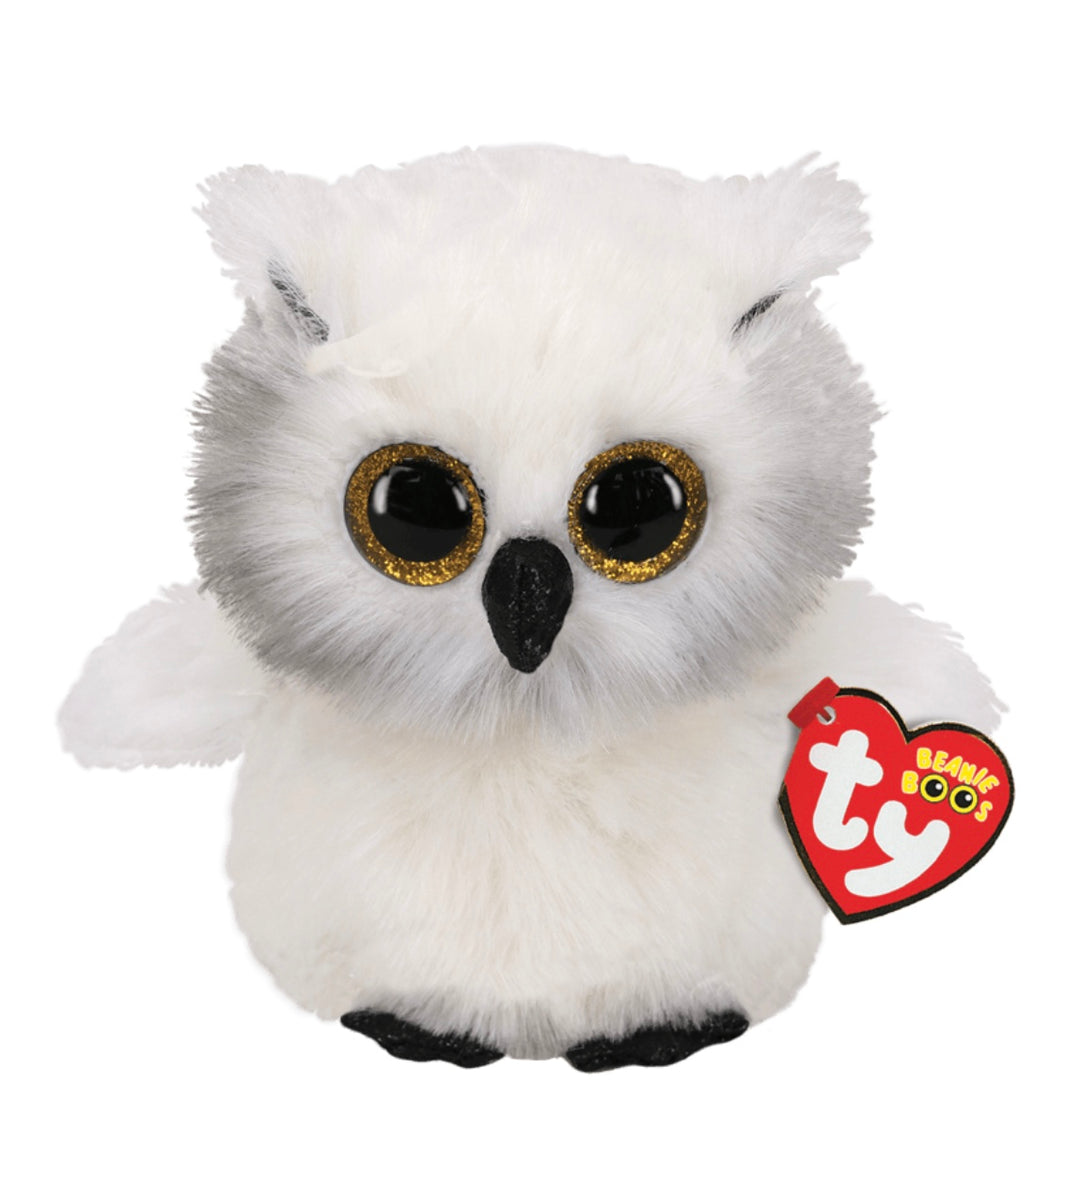 TY Beanie Boos Stuffed Animal, Austin-240 Kids-Inspired by Justeen-Women's Clothing Boutique in Chicago, Illinois